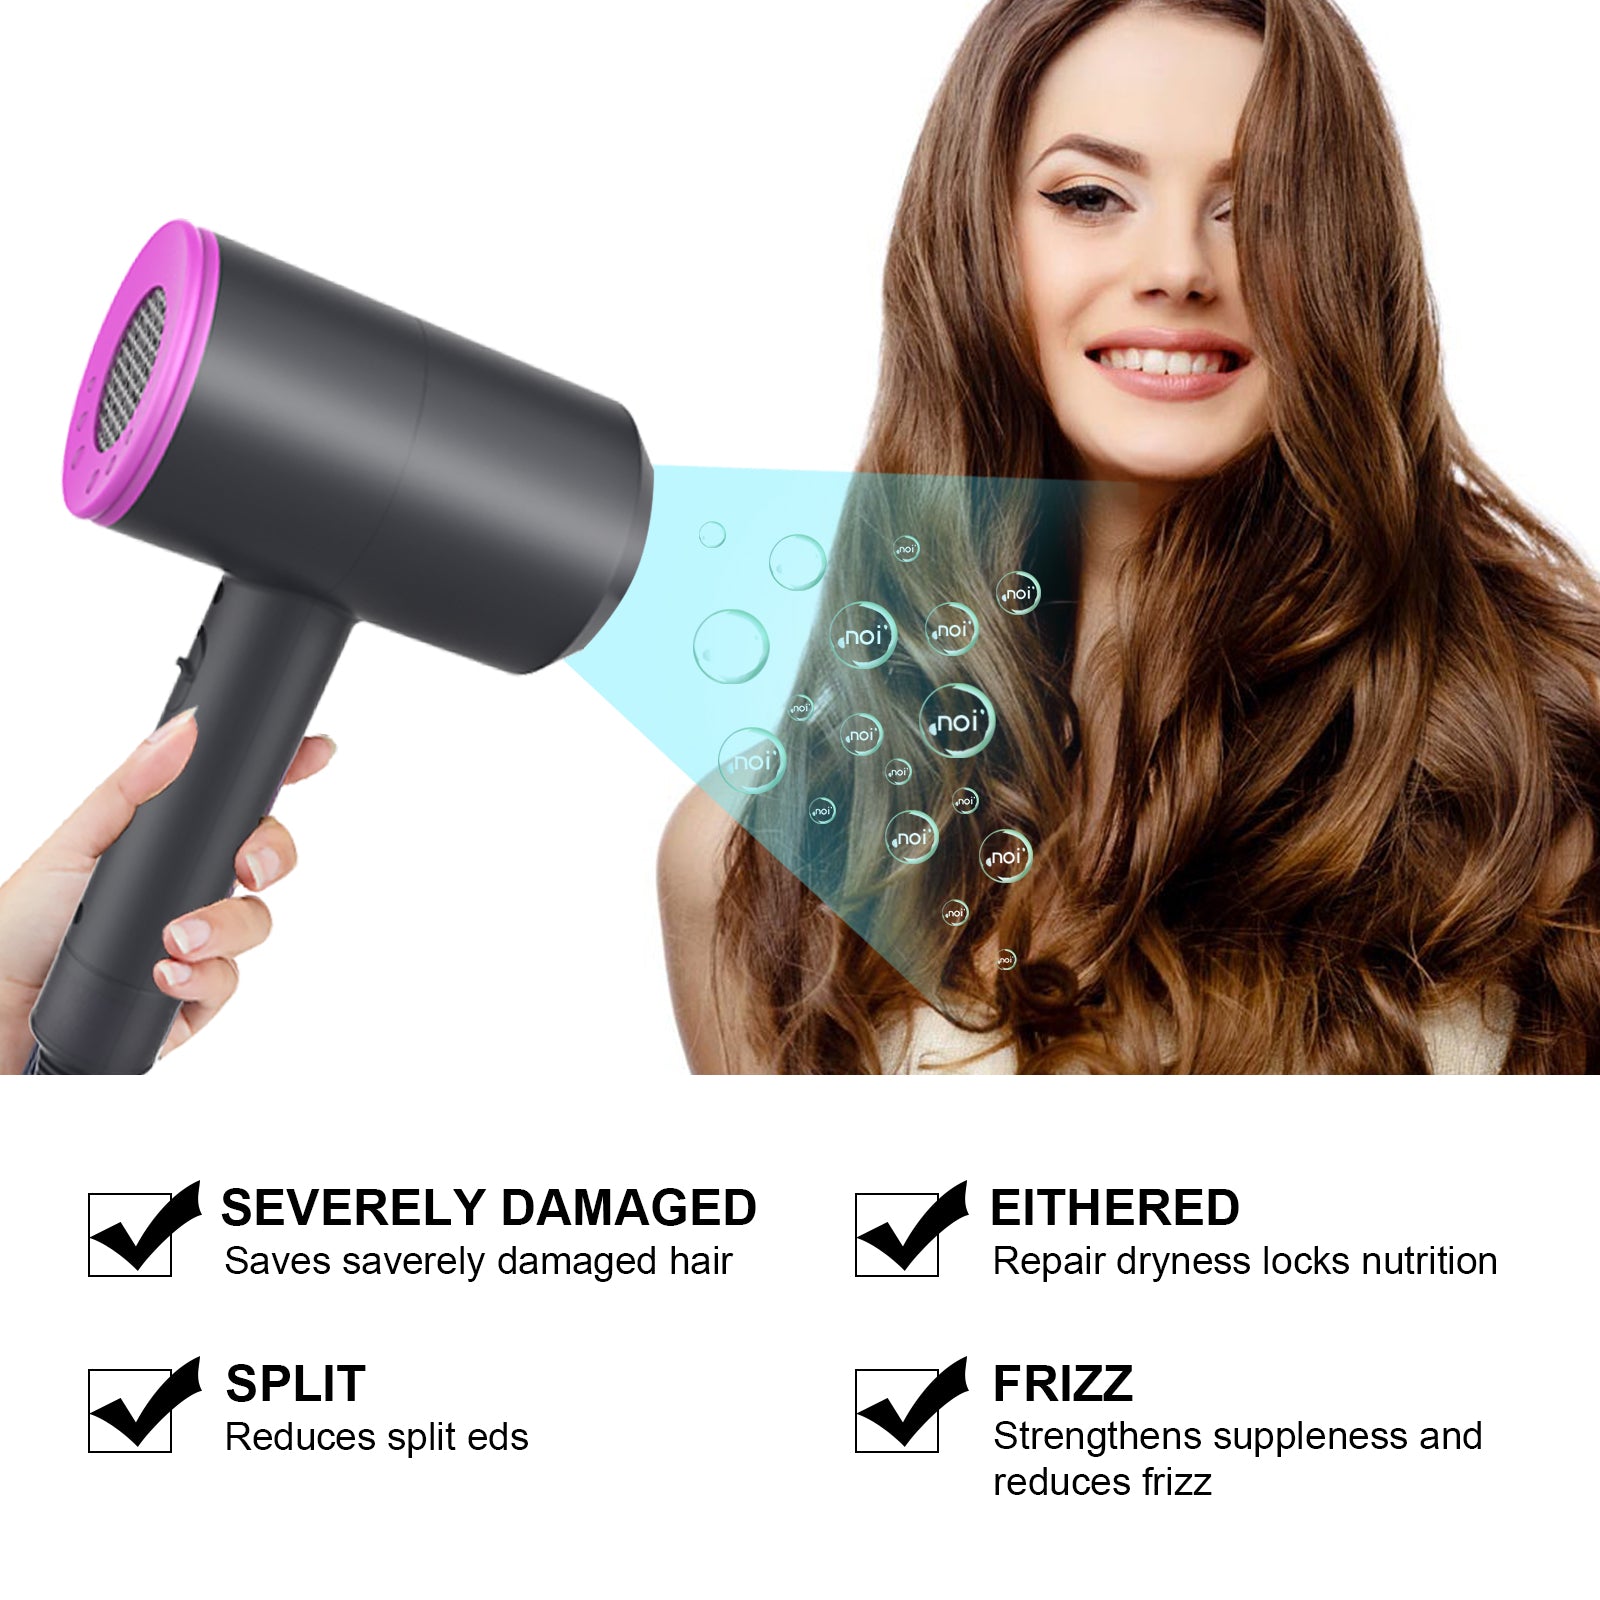 Fast Drying Air Blow Dryer